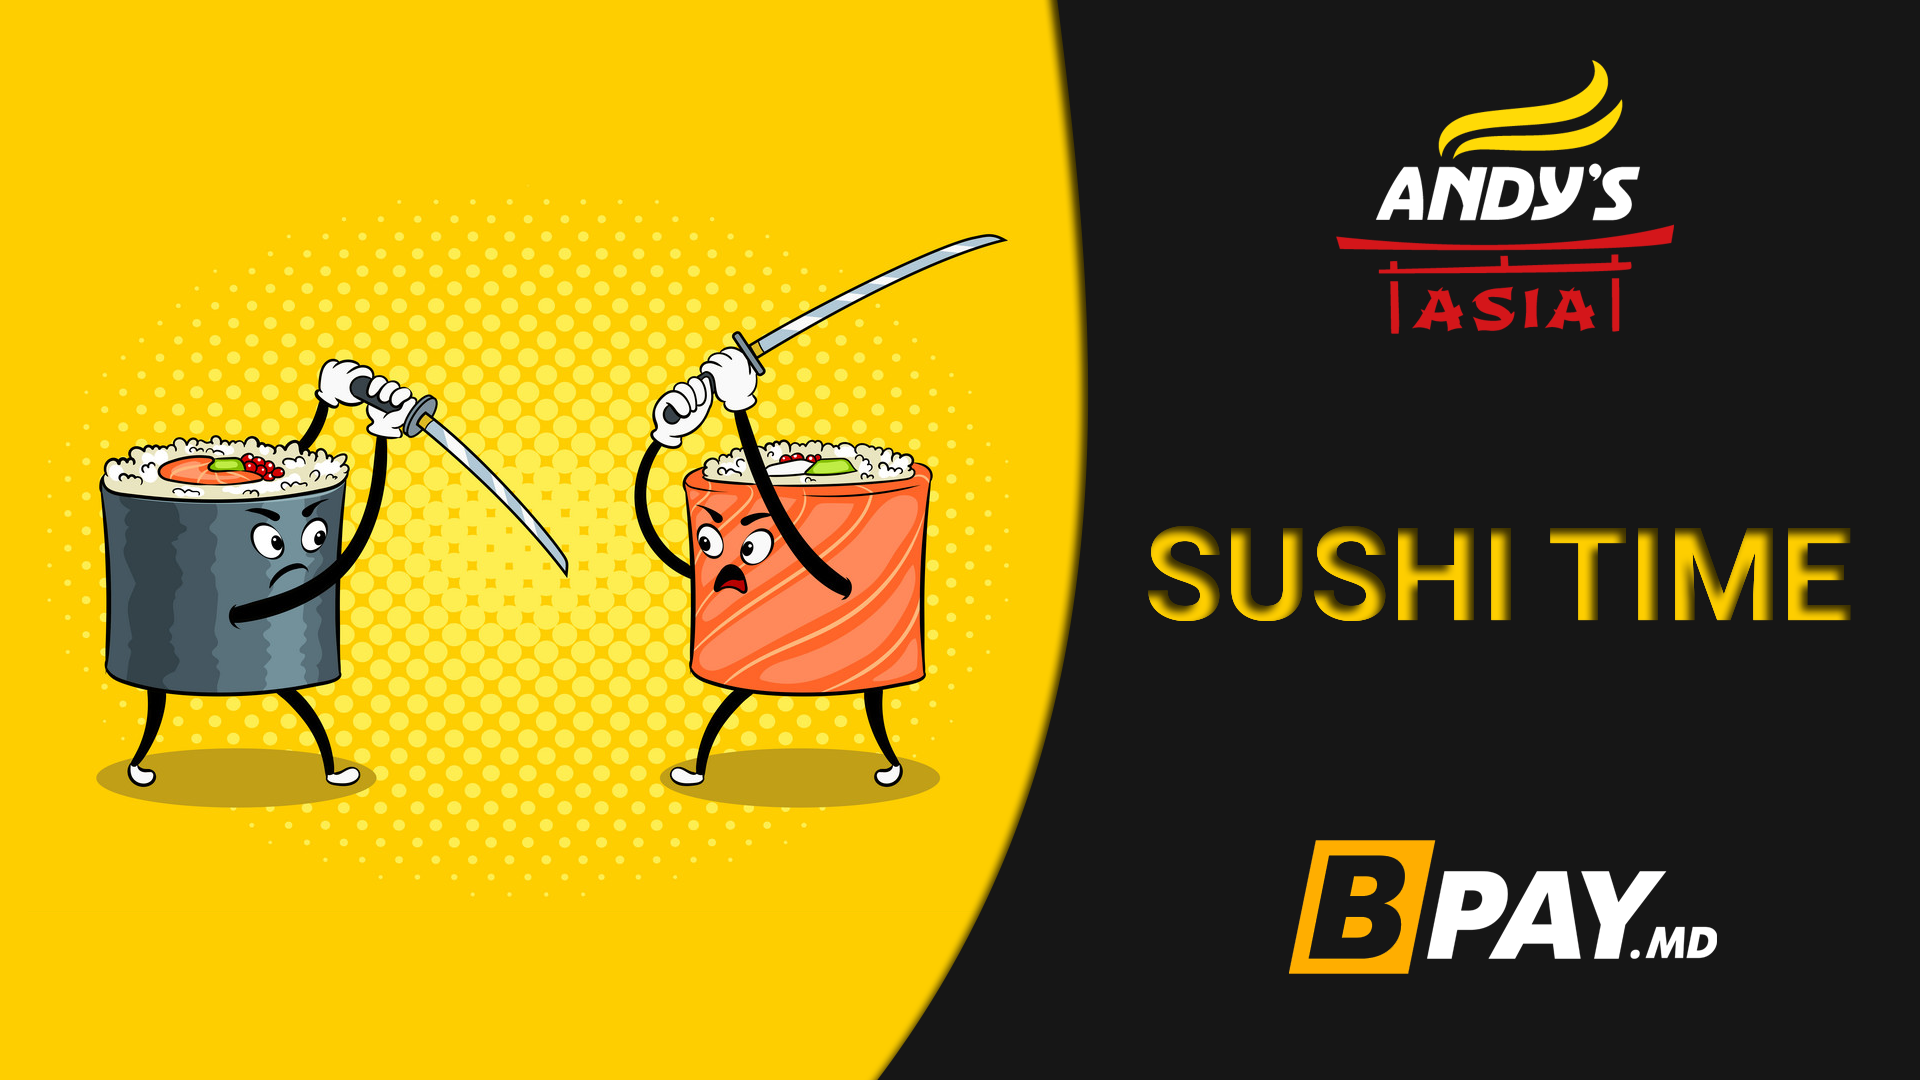 🍣 SUSHI TIME: Andy’s Asia cu BPAY